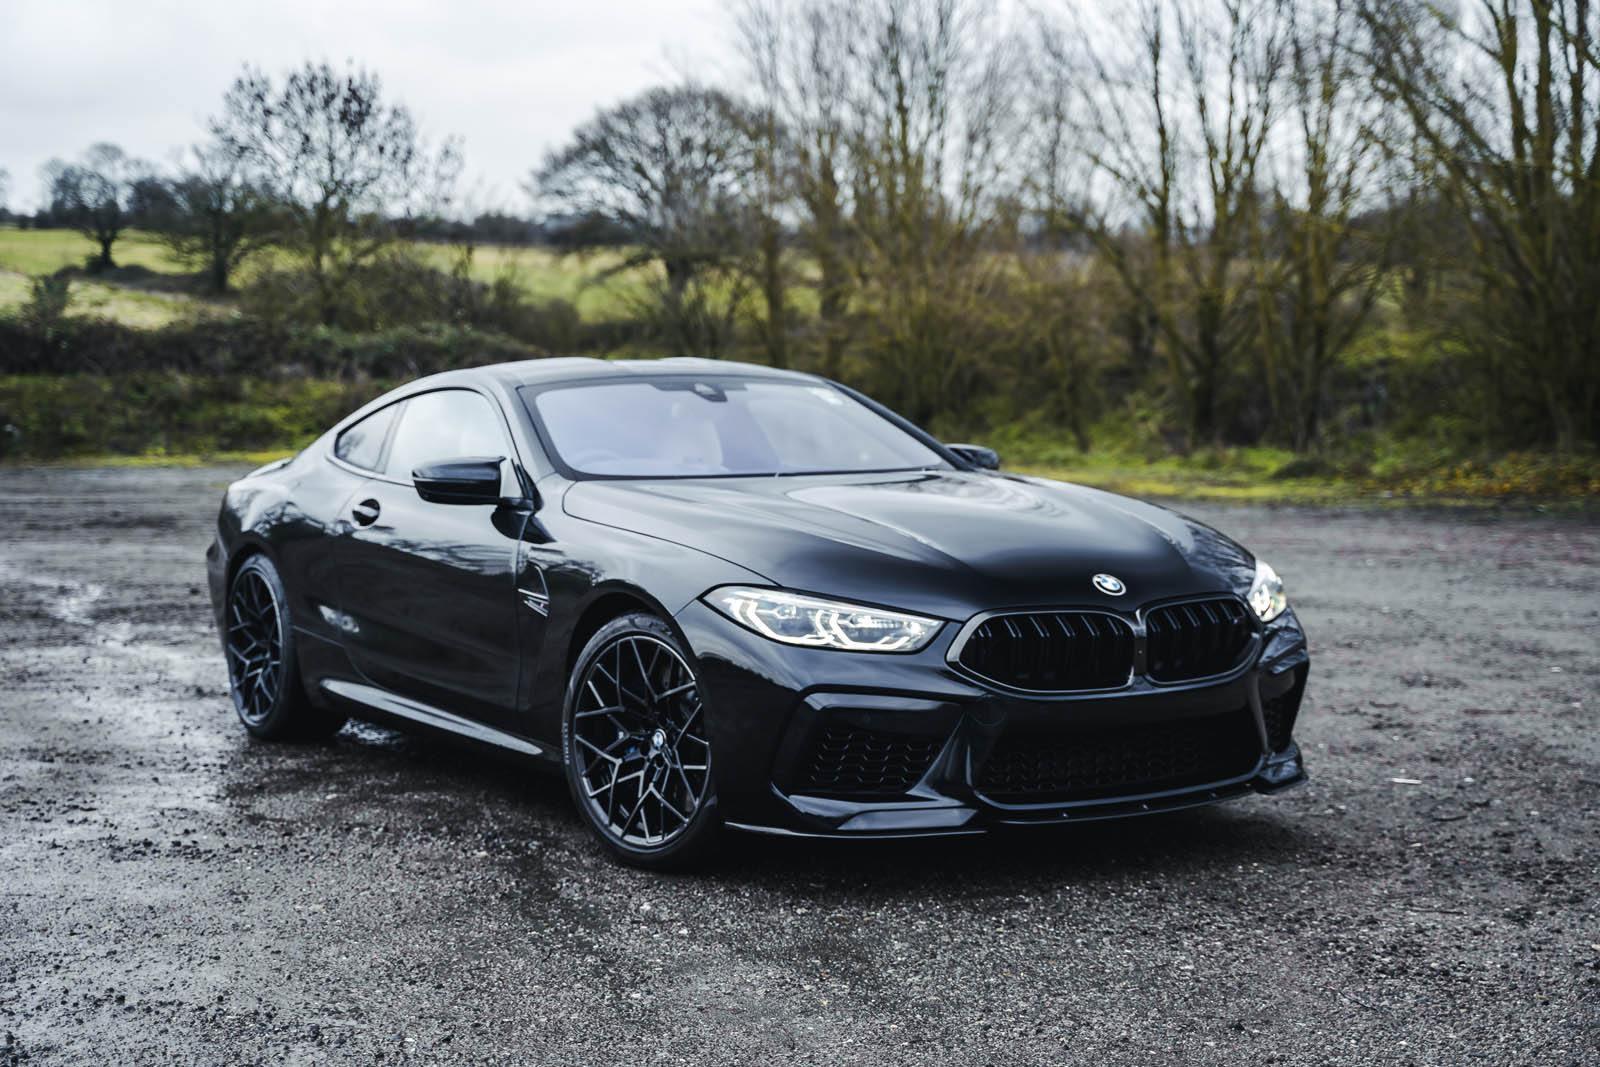 Racing Driver Oliver Webb brings his BMW M8 to AUTOID. - AUTOID